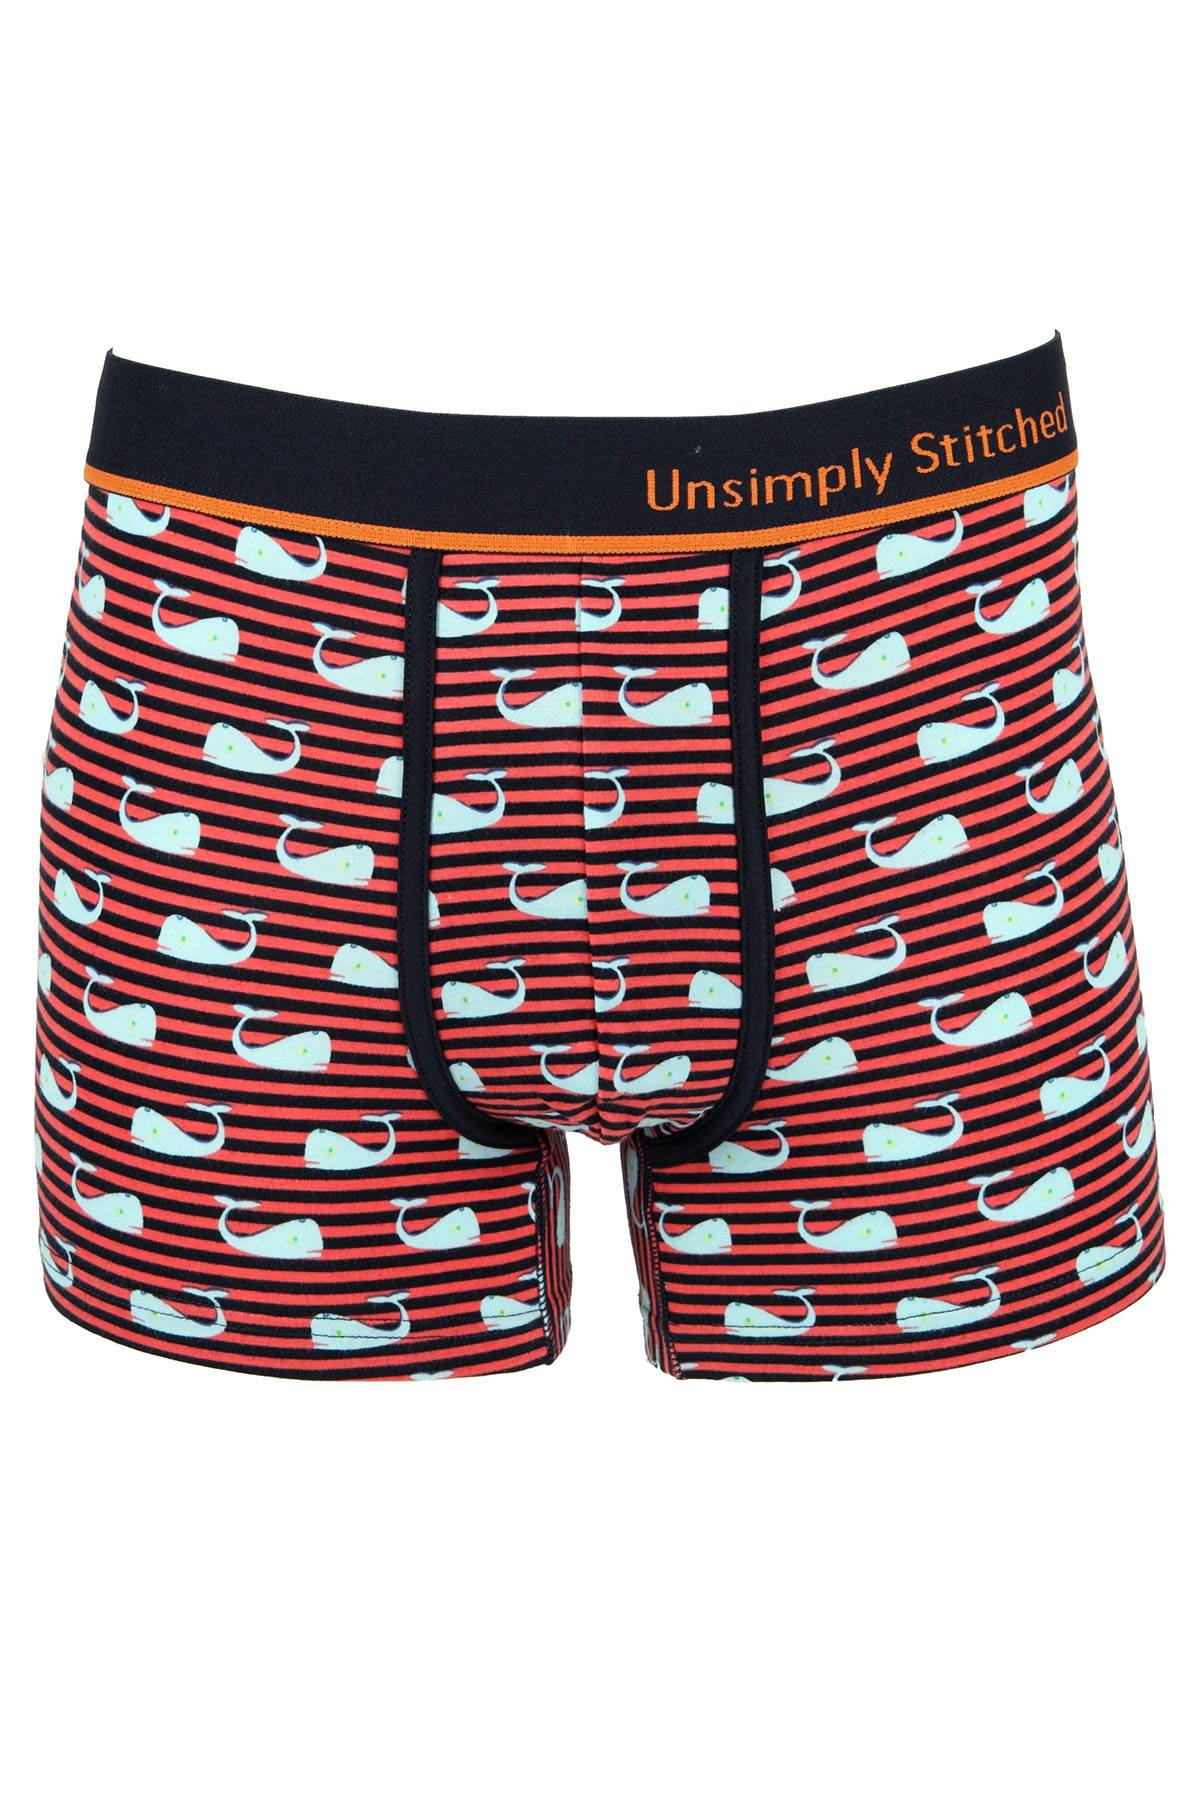 Unsimply Stitched Coral Stripe Whale Trunk